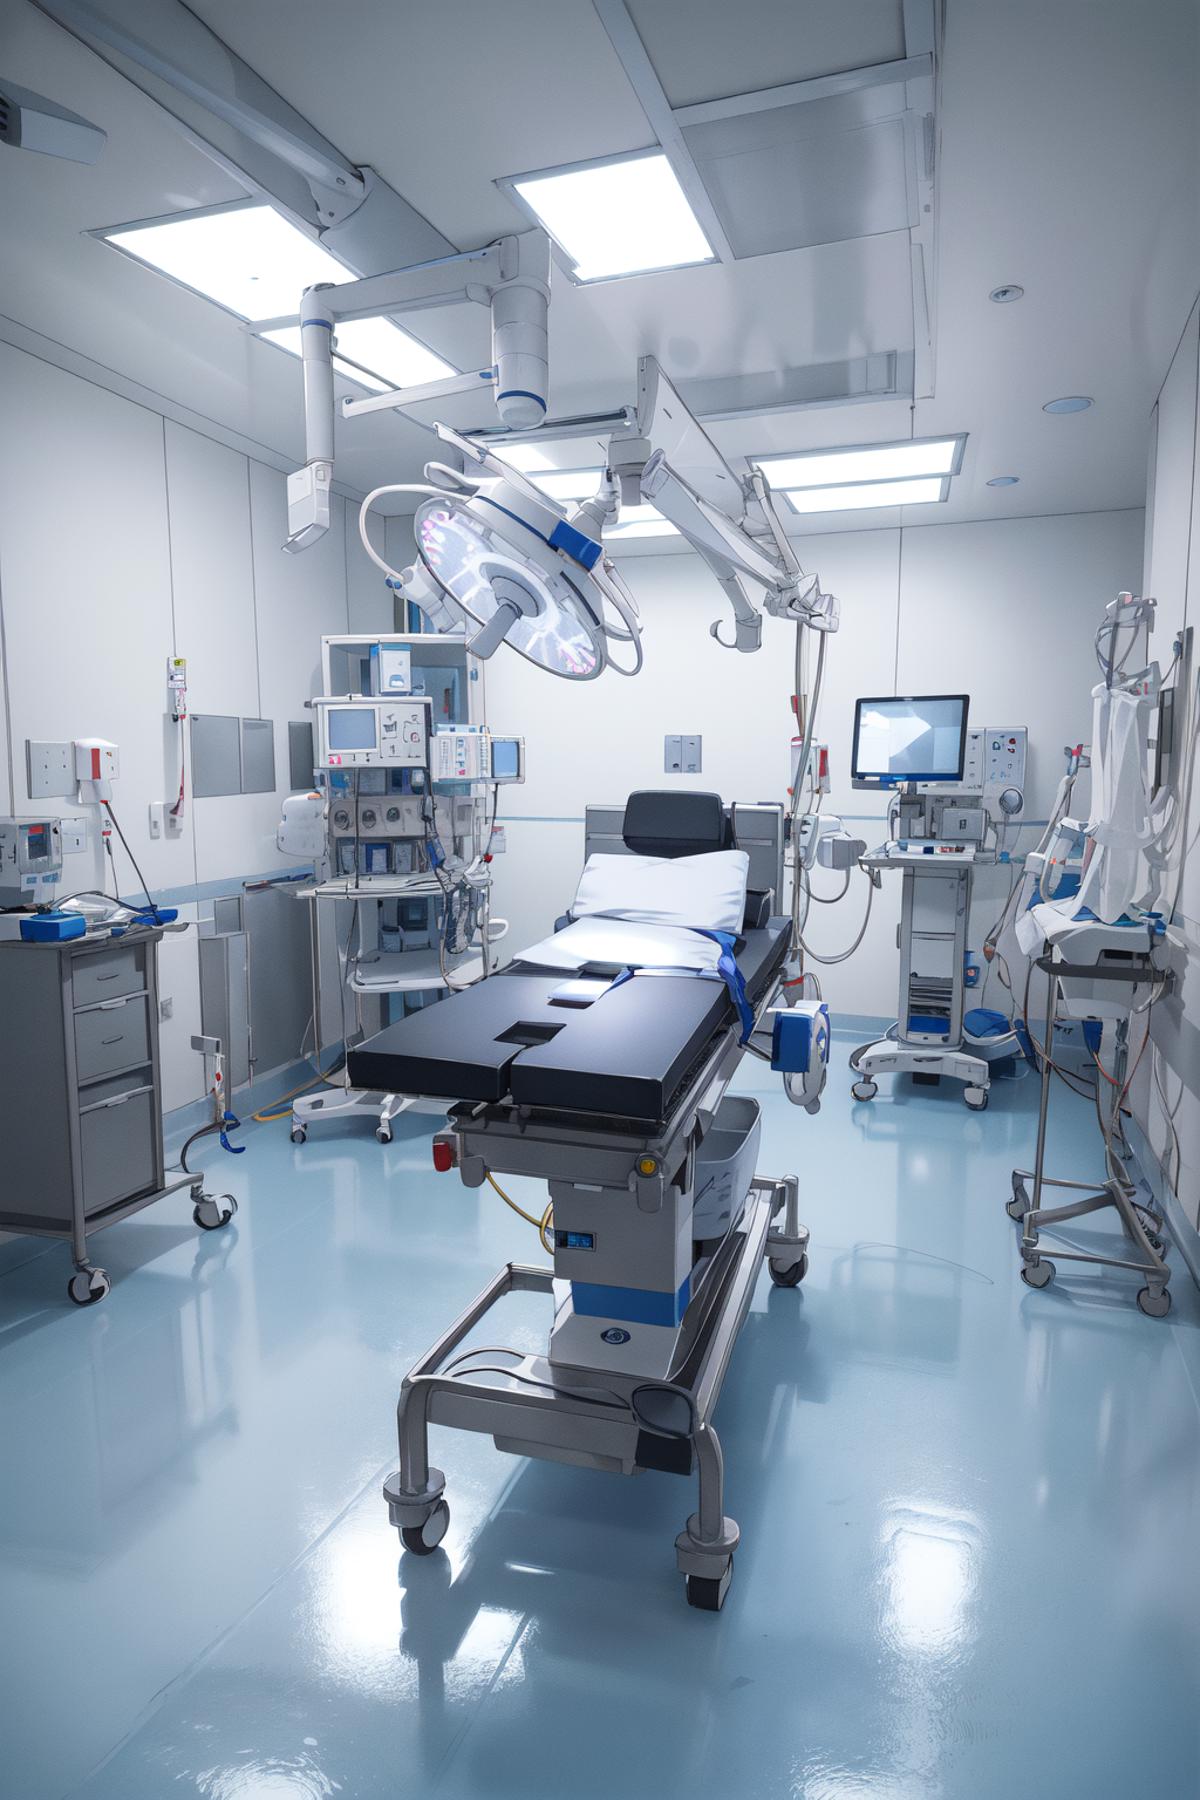 Modern Operating Room image by phageoussurgery439